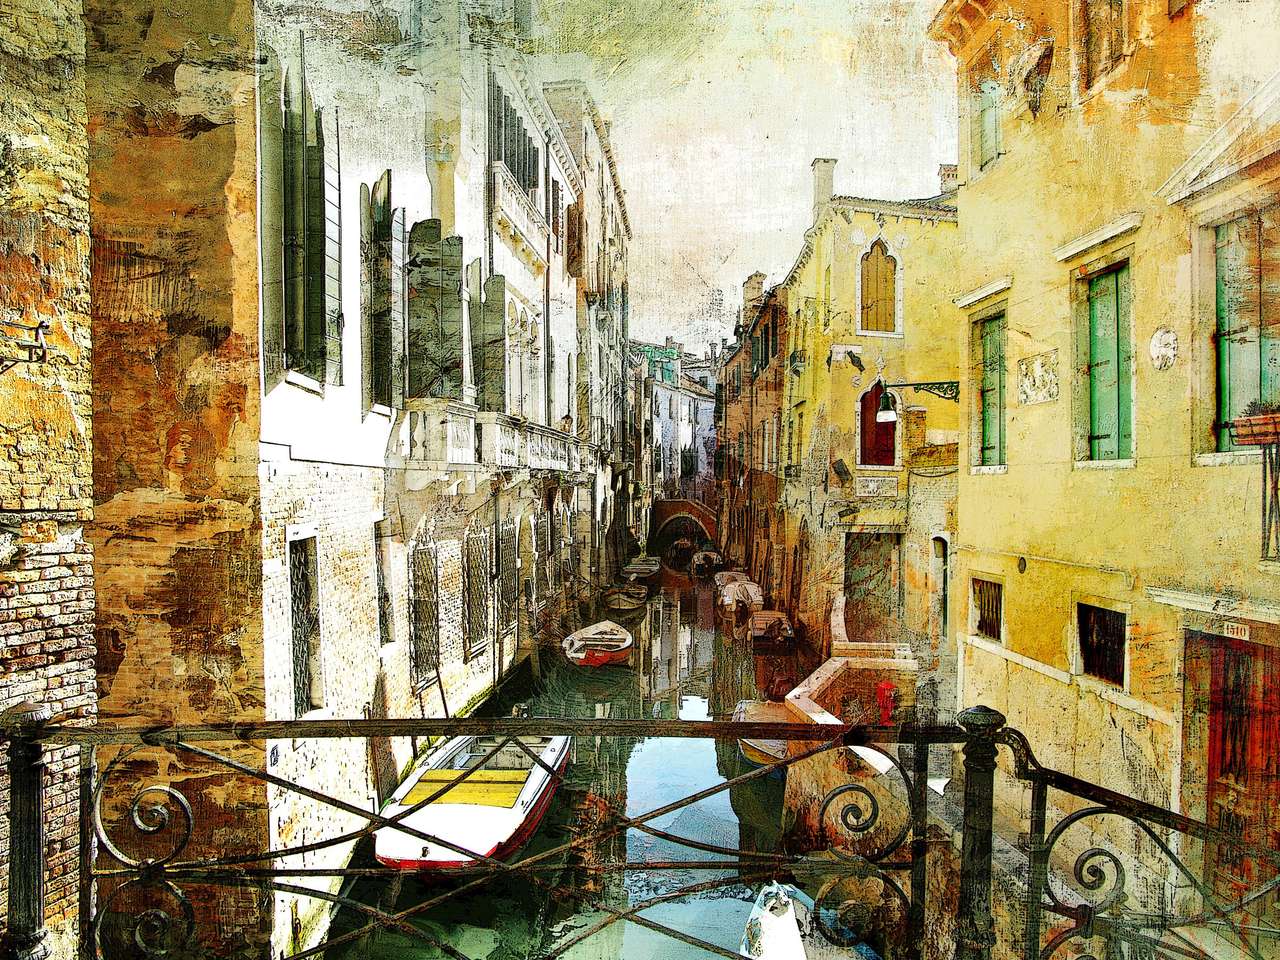 Venetian pictures - artwotk in painting style puzzle online